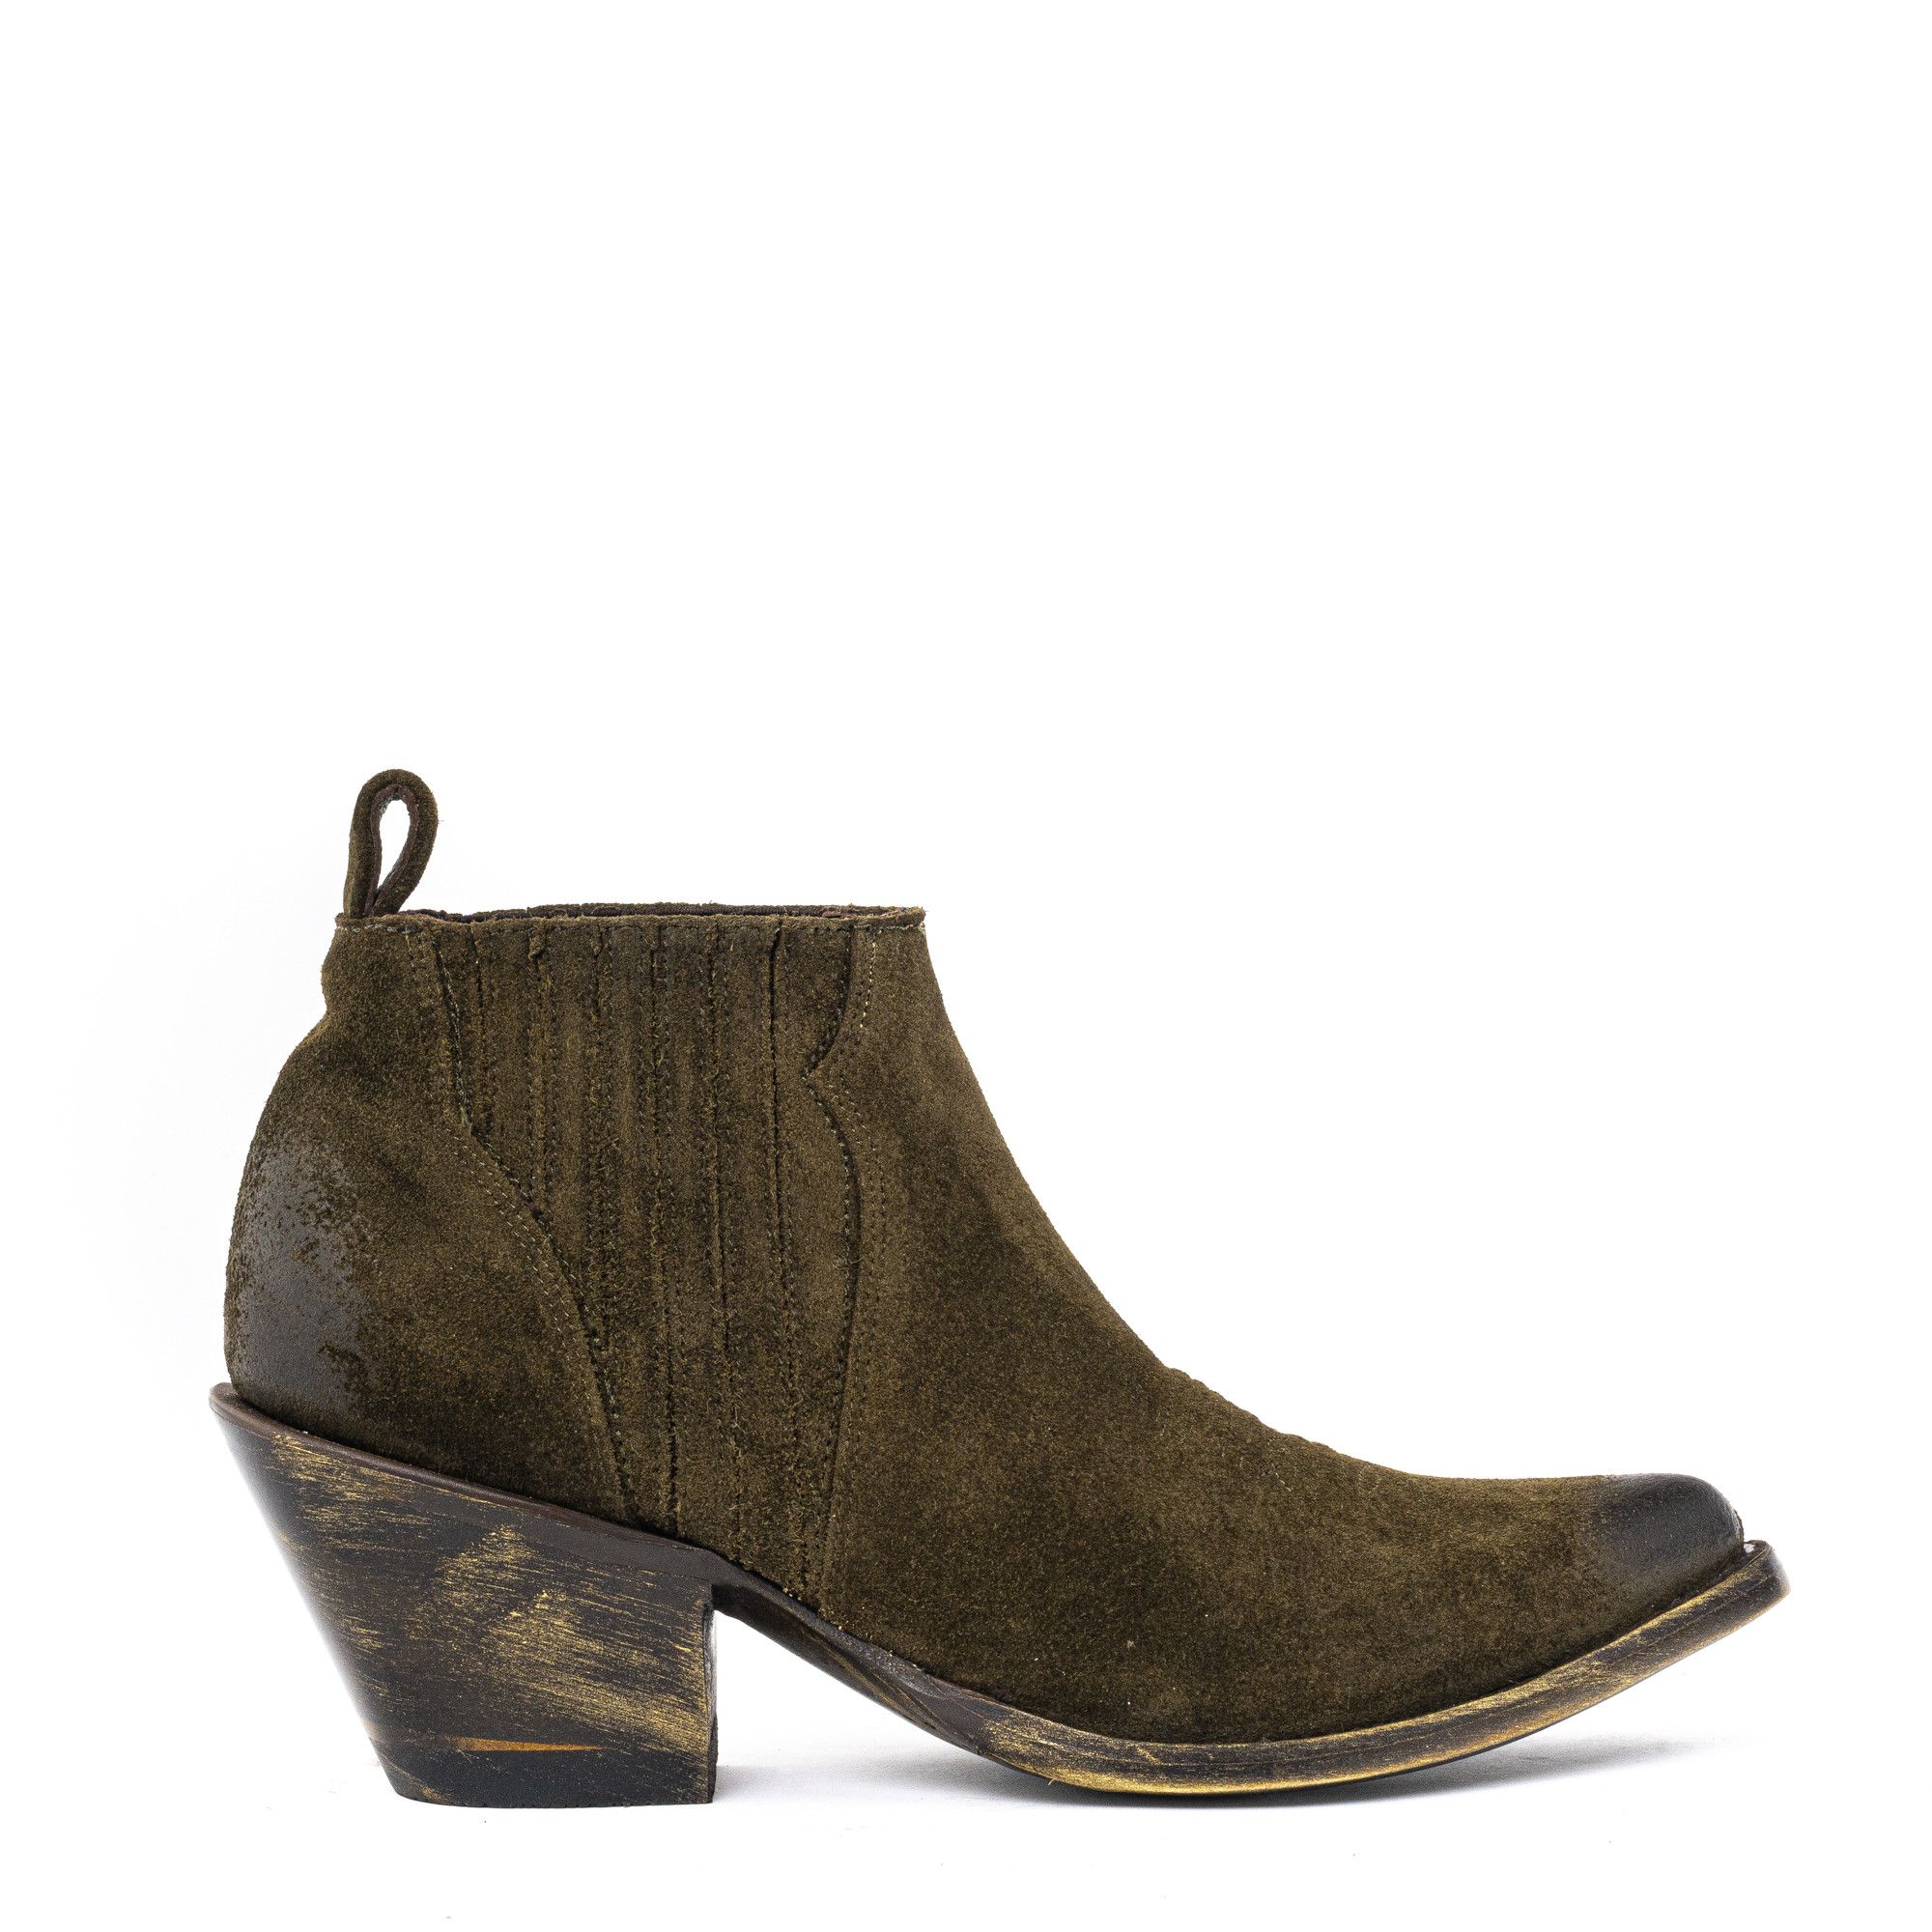 KRISTINNE DARK OLIVE SUEDE POINTED TOE ANKLE BOOTS WITH COWBOY STYLE STITCHING  AND ELASTICIZED SIDES PANEL  Total heel height 2